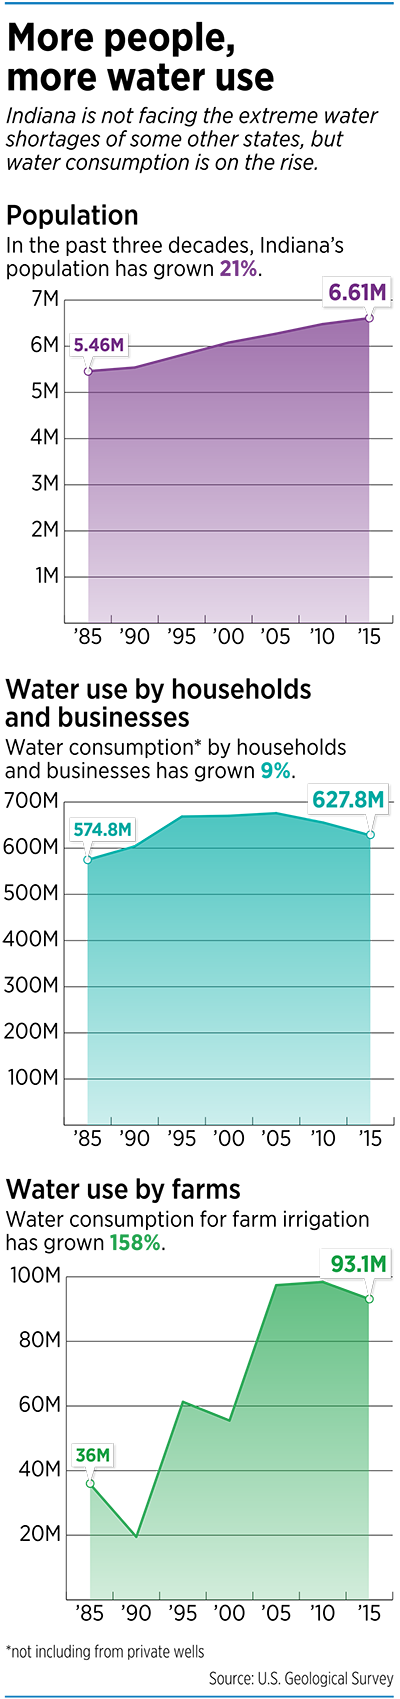 More people, more water use